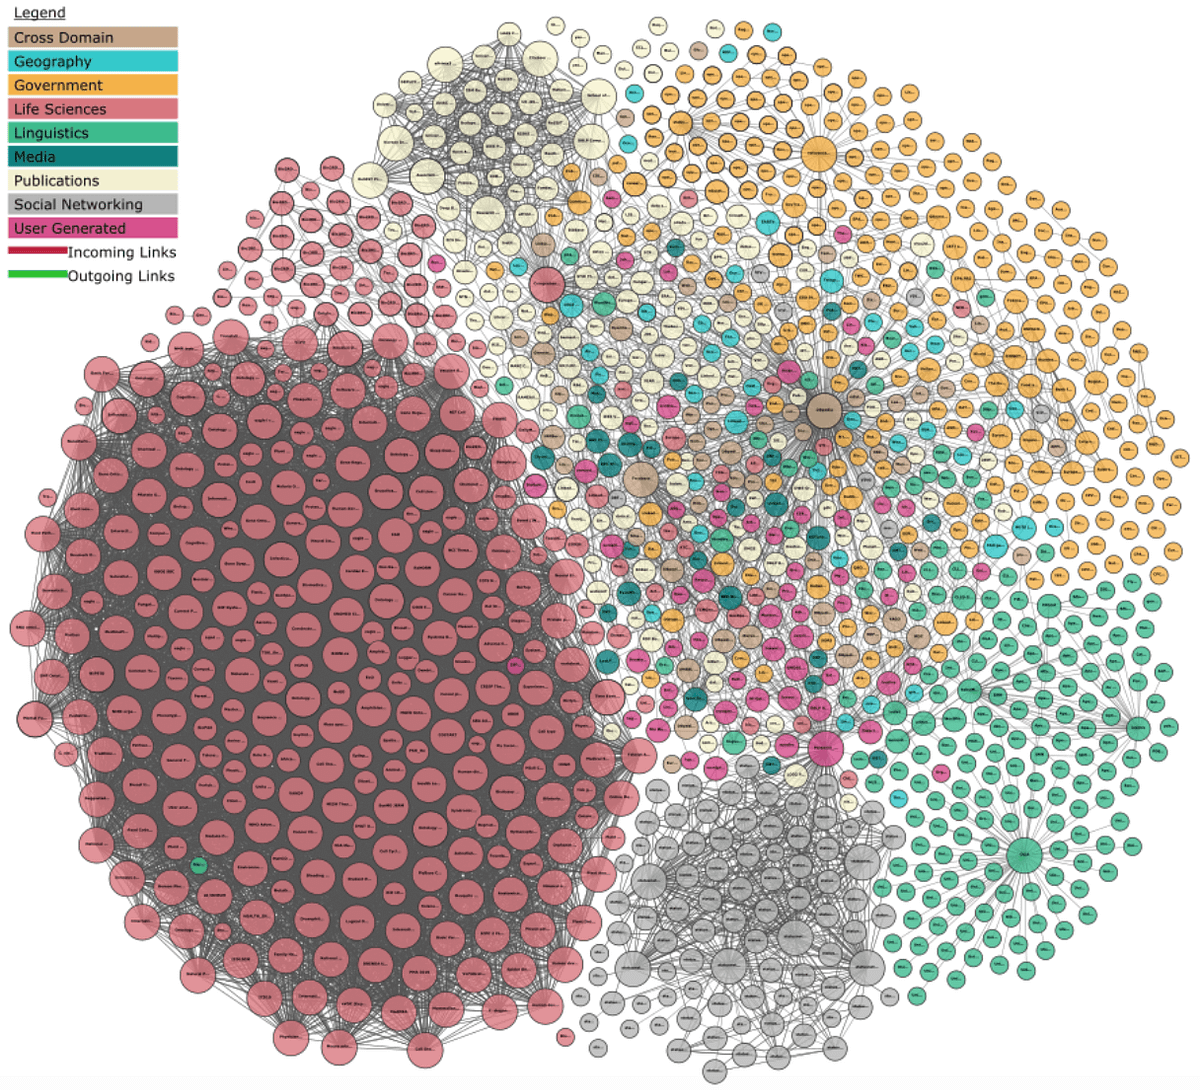 Exploitation of a Semantic Web of Linked Data, for Publishers